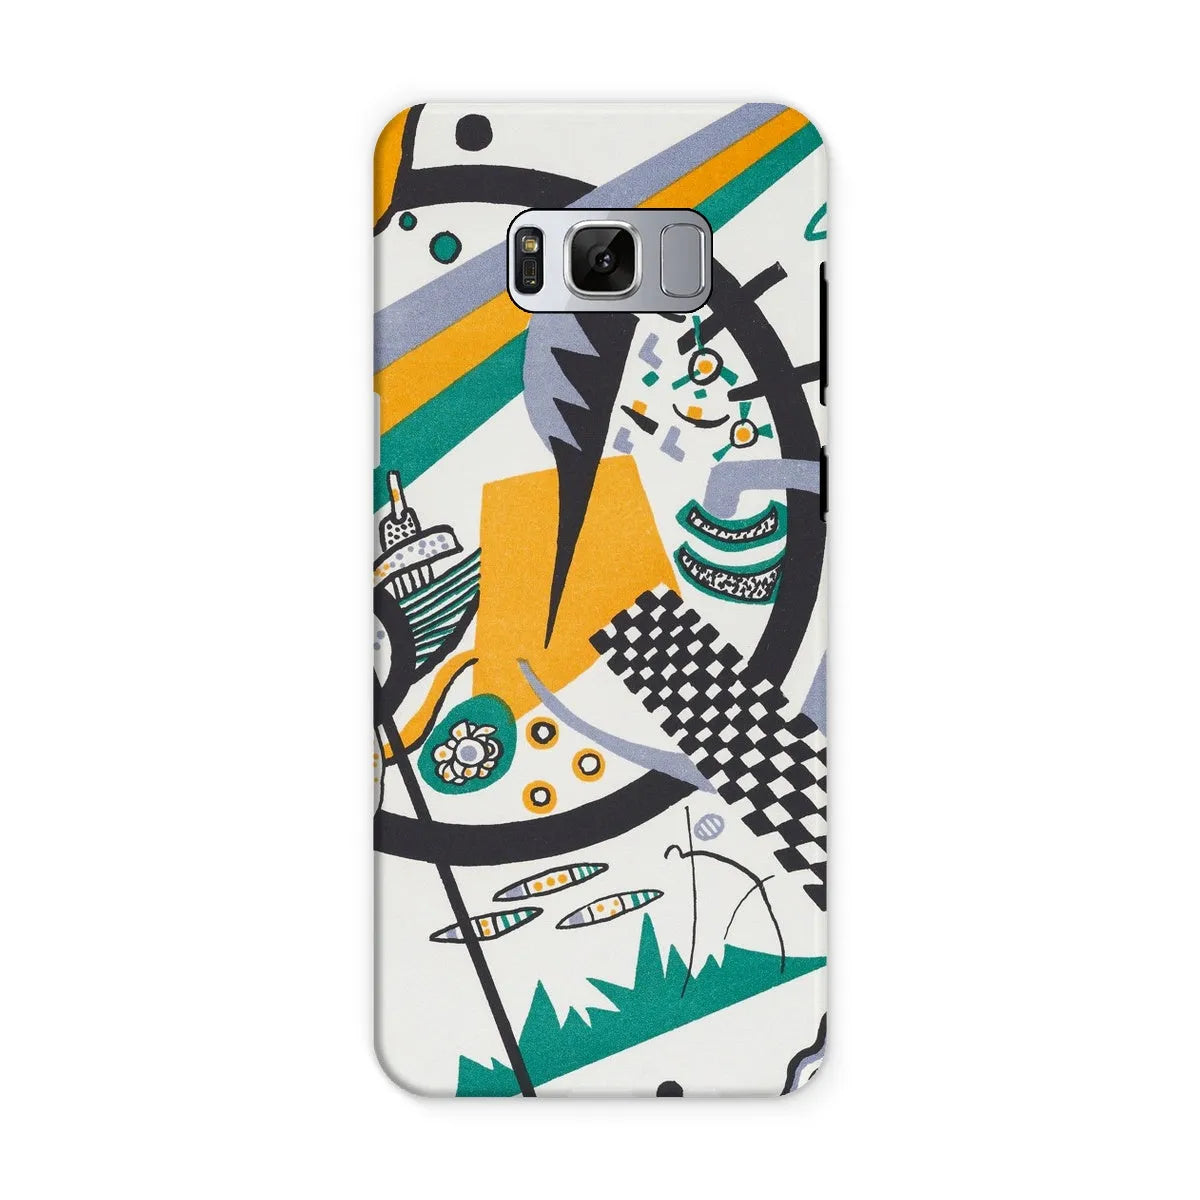 Small Worlds Iv - Expressionist Phone Case - Wassily Kandinsky - Samsung Galaxy S8 / Matte - Mobile Phone Cases